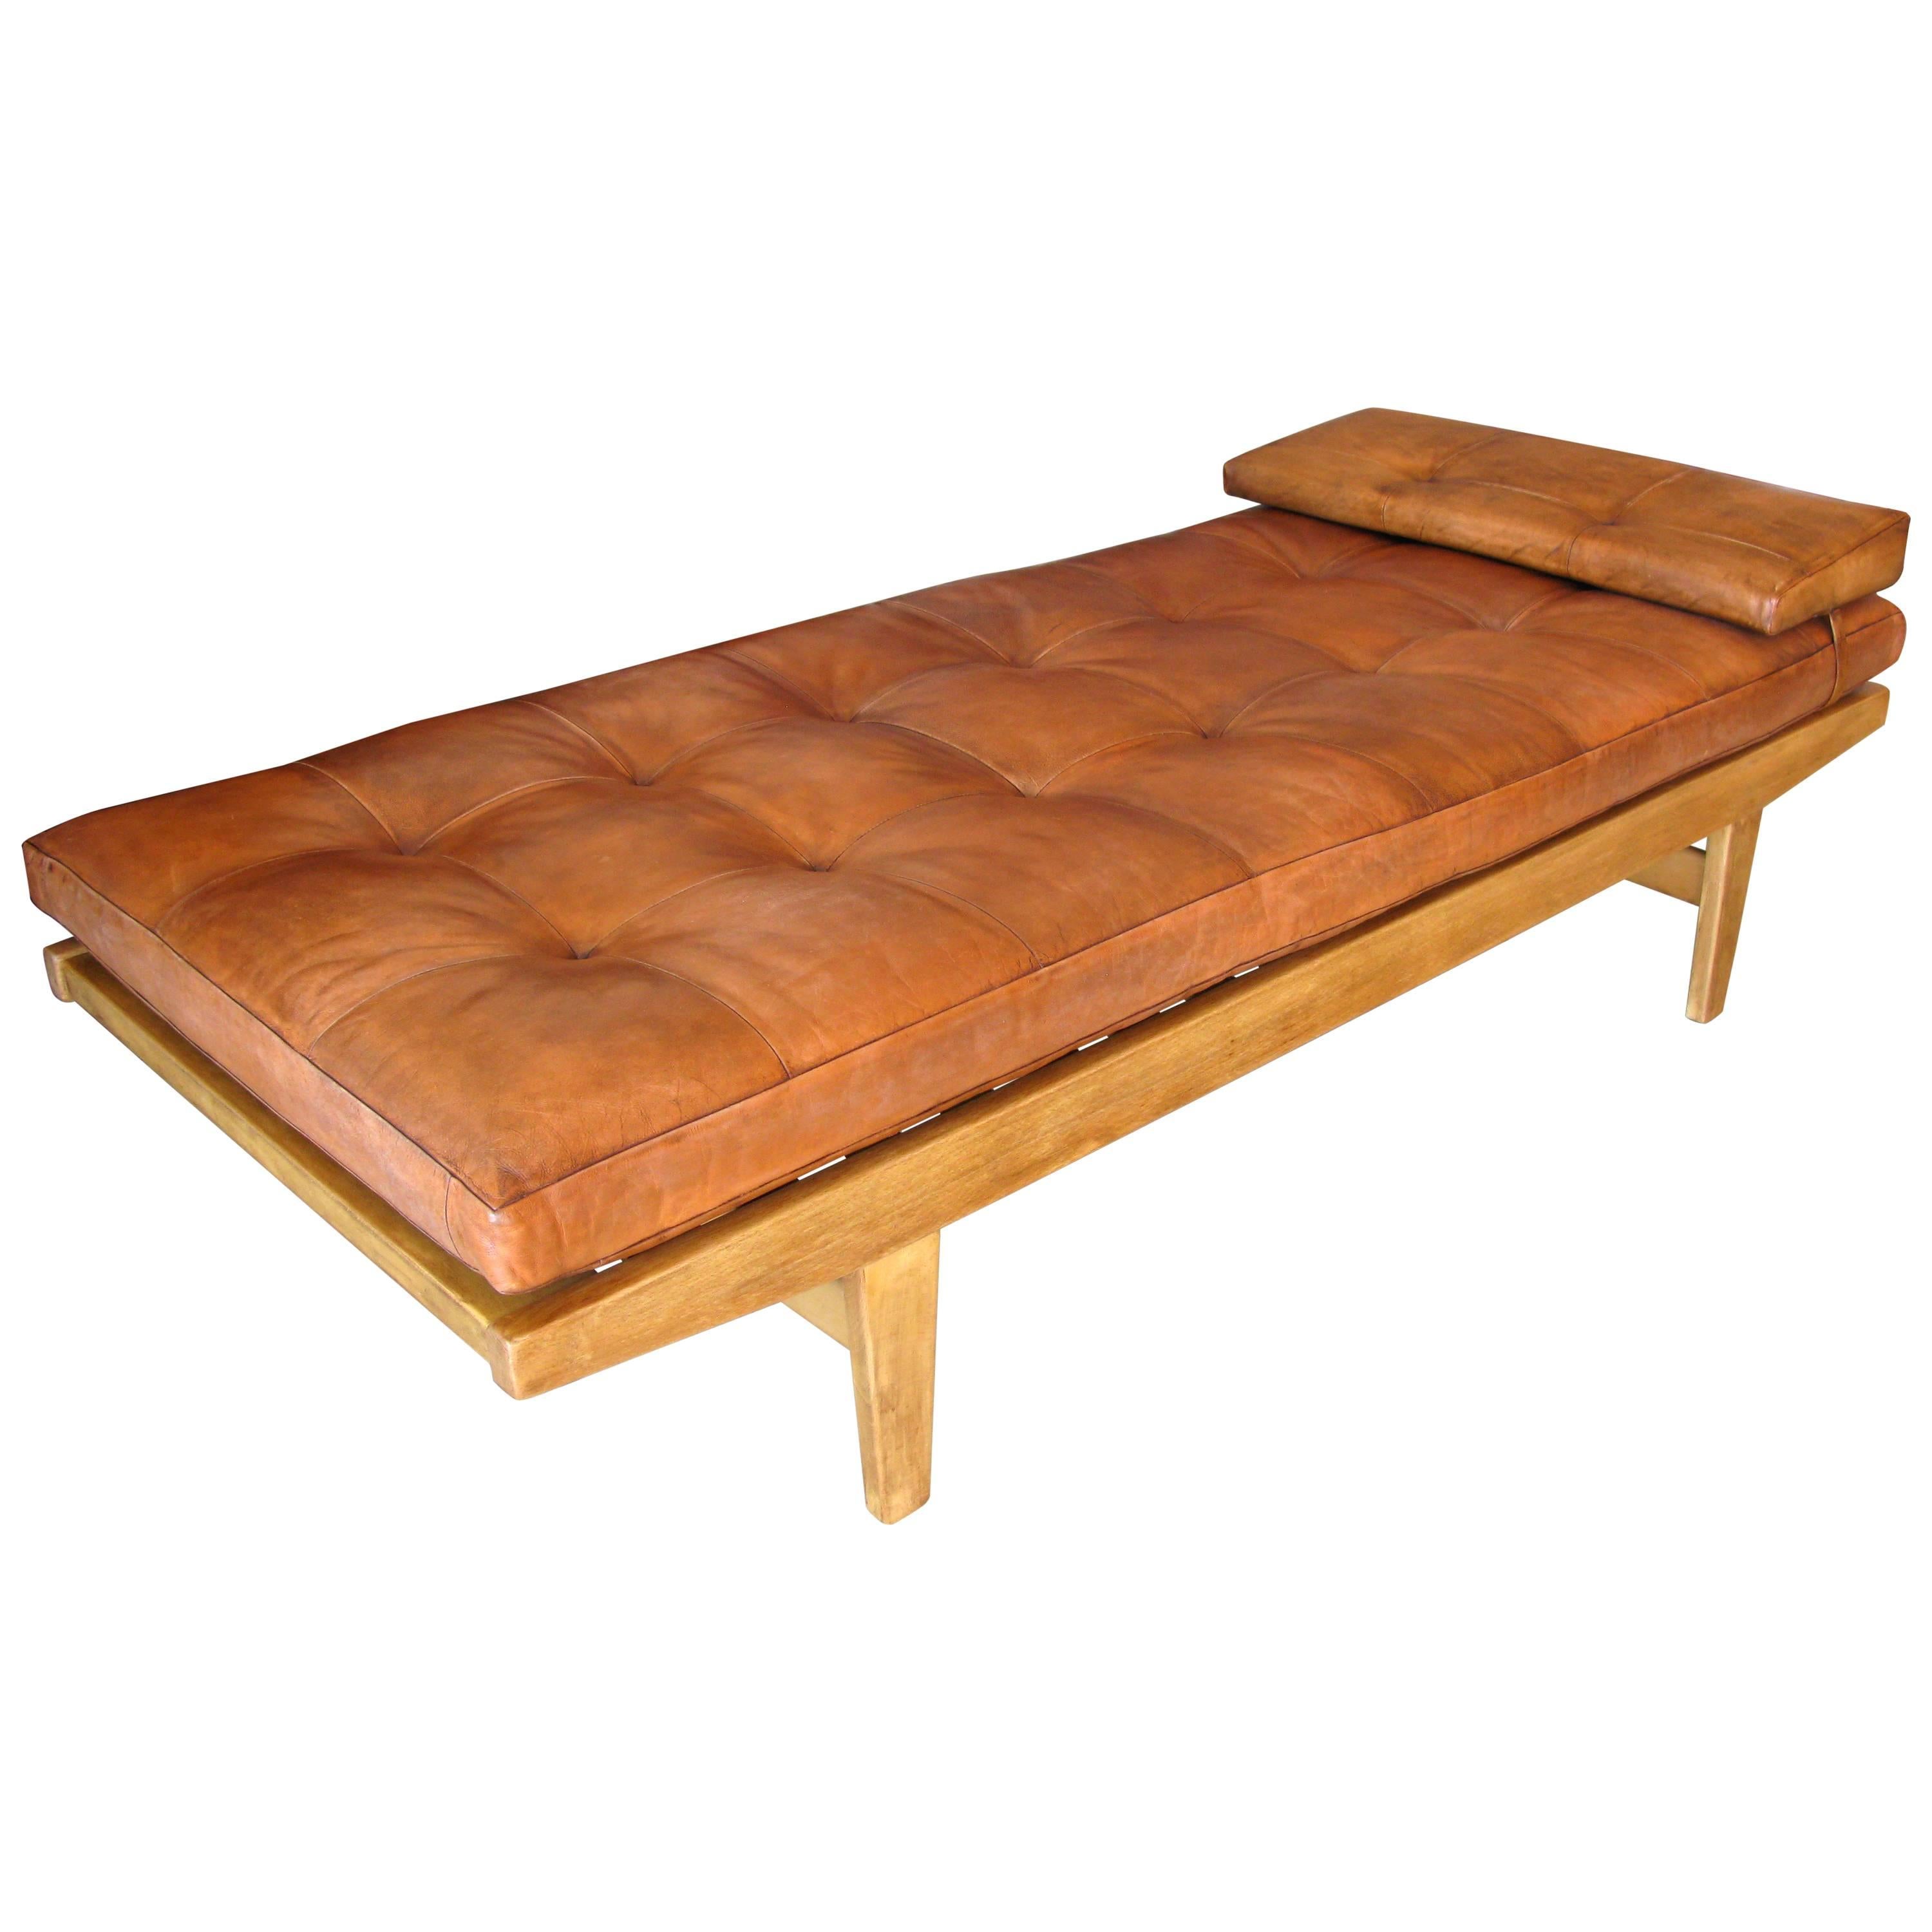 Poul Volther Leather and Teak Daybed